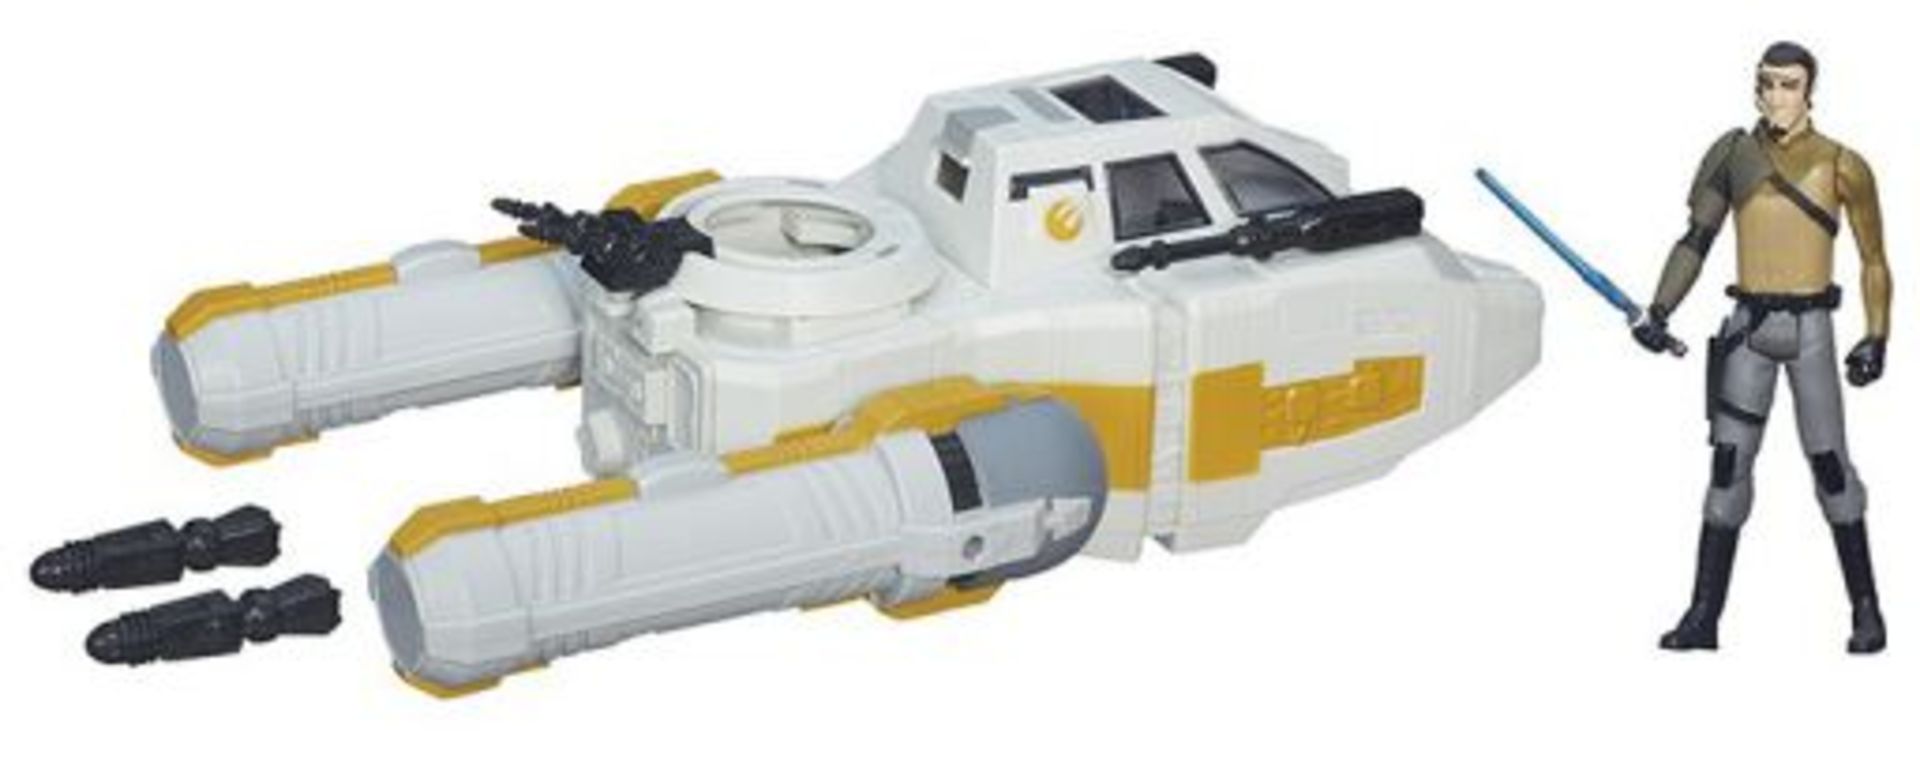 V Brand New Hasbro Star Wars Rebels Y-Wing Scout Bomber Kanan Jarrus-Armed With Proton Bombs & Laser